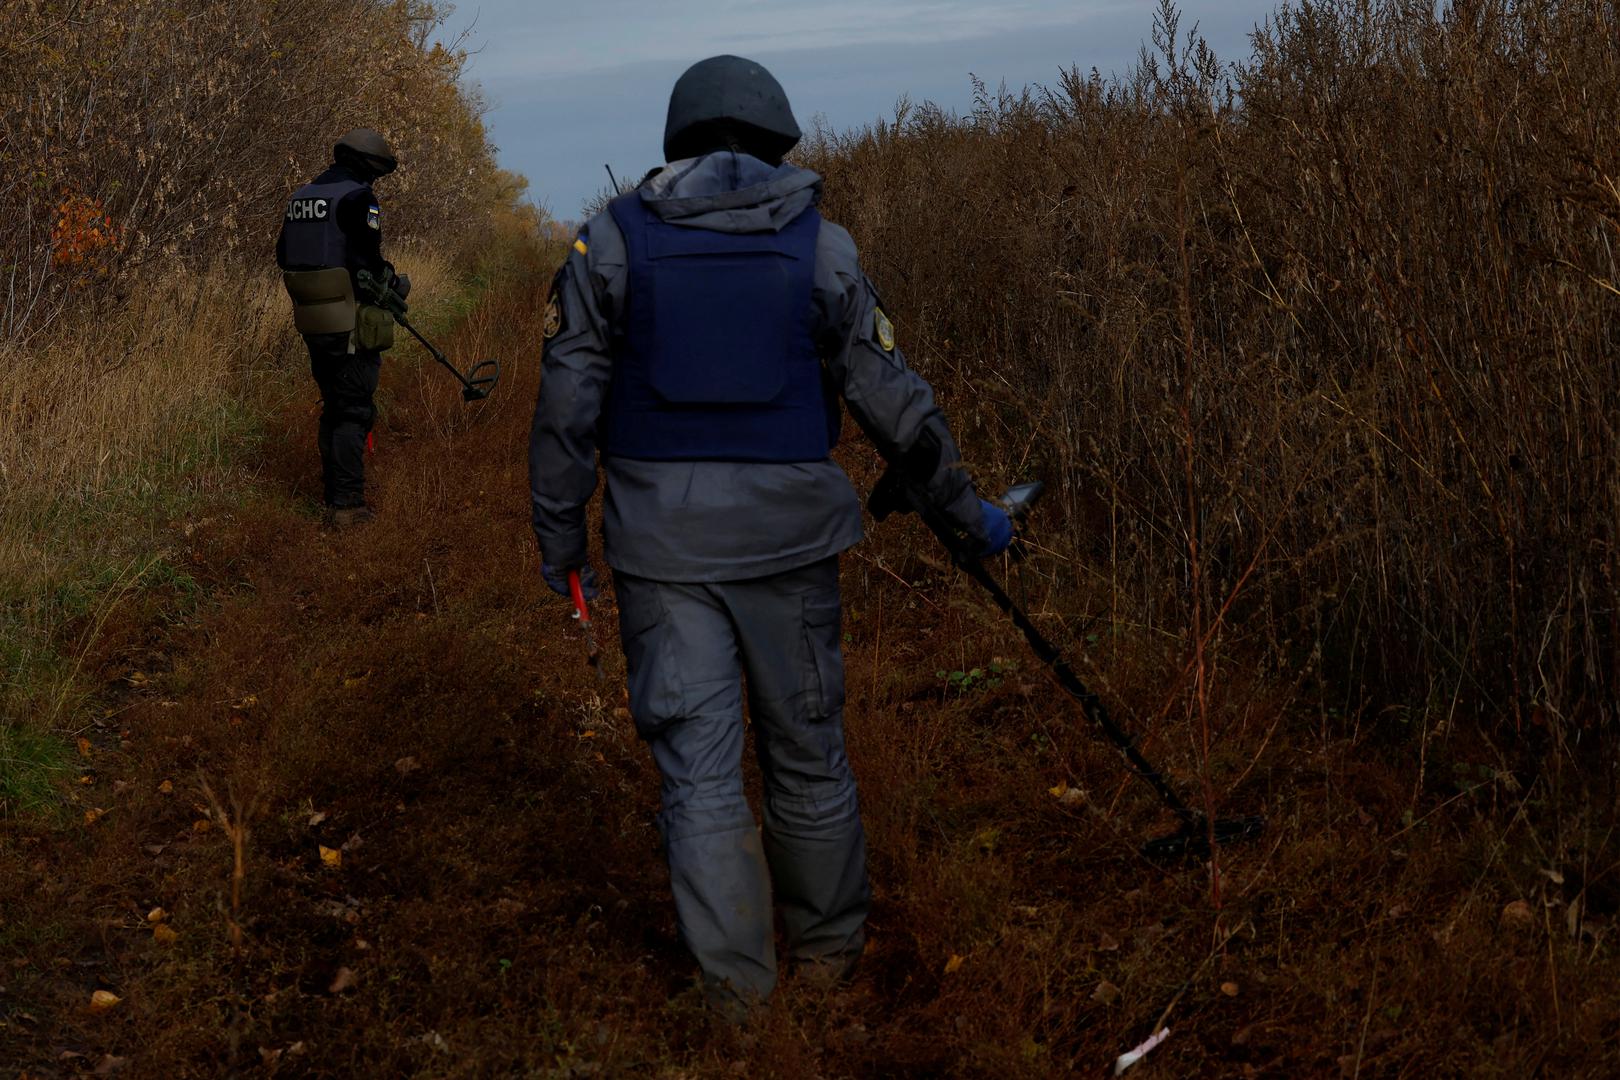 Firefighters Alexander and Maxim from the de-mining squad of the Ukrainian emergency services scan for land mines and other unexploded ordnance to clear an area for electricians to access electricity power lines damaged by Russian strikes in order to repair them safely, as Russia's invasion of Ukraine continues, in Ruska Lozova, Ukraine, October 25, 2022. REUTERS/Clodagh Kilcoyne Photo: Clodagh Kilcoyne/REUTERS